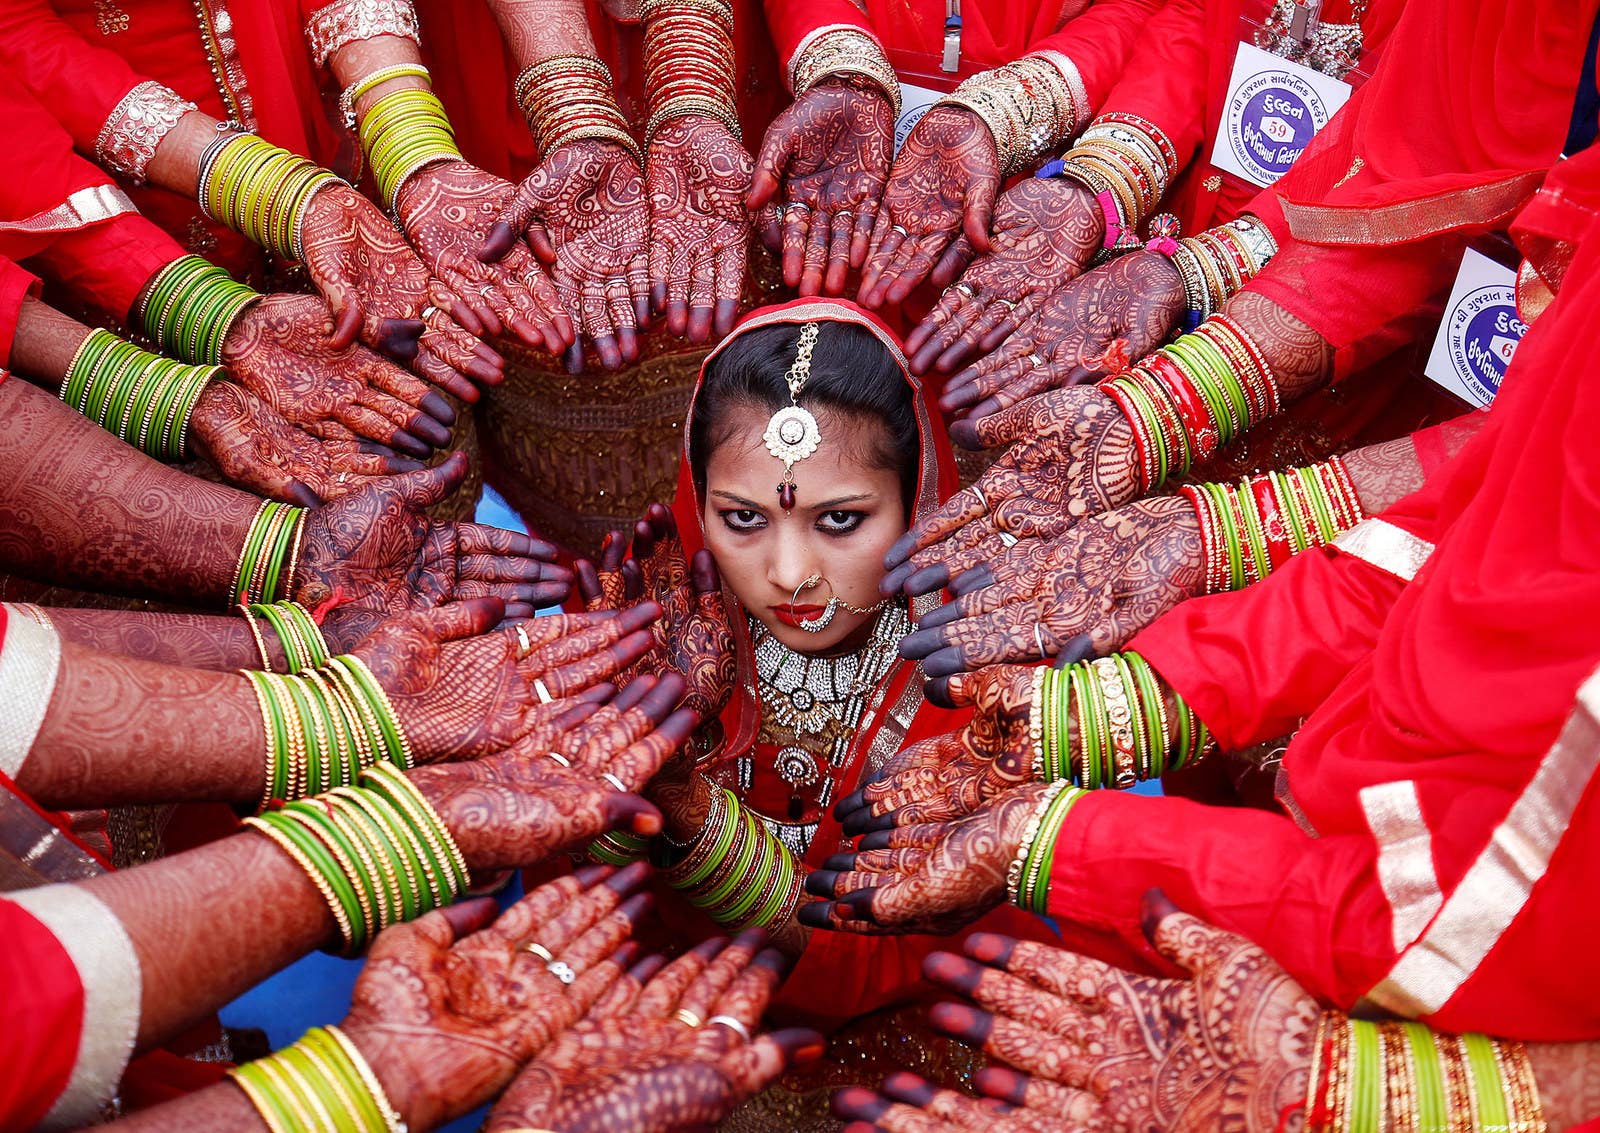 Brides display their hands decorated with henna during a mass marriage ceremony in which, according to its organizers, 70 Muslim couples took their wedding vows in Ahmedabad, India, on Feb. 11.